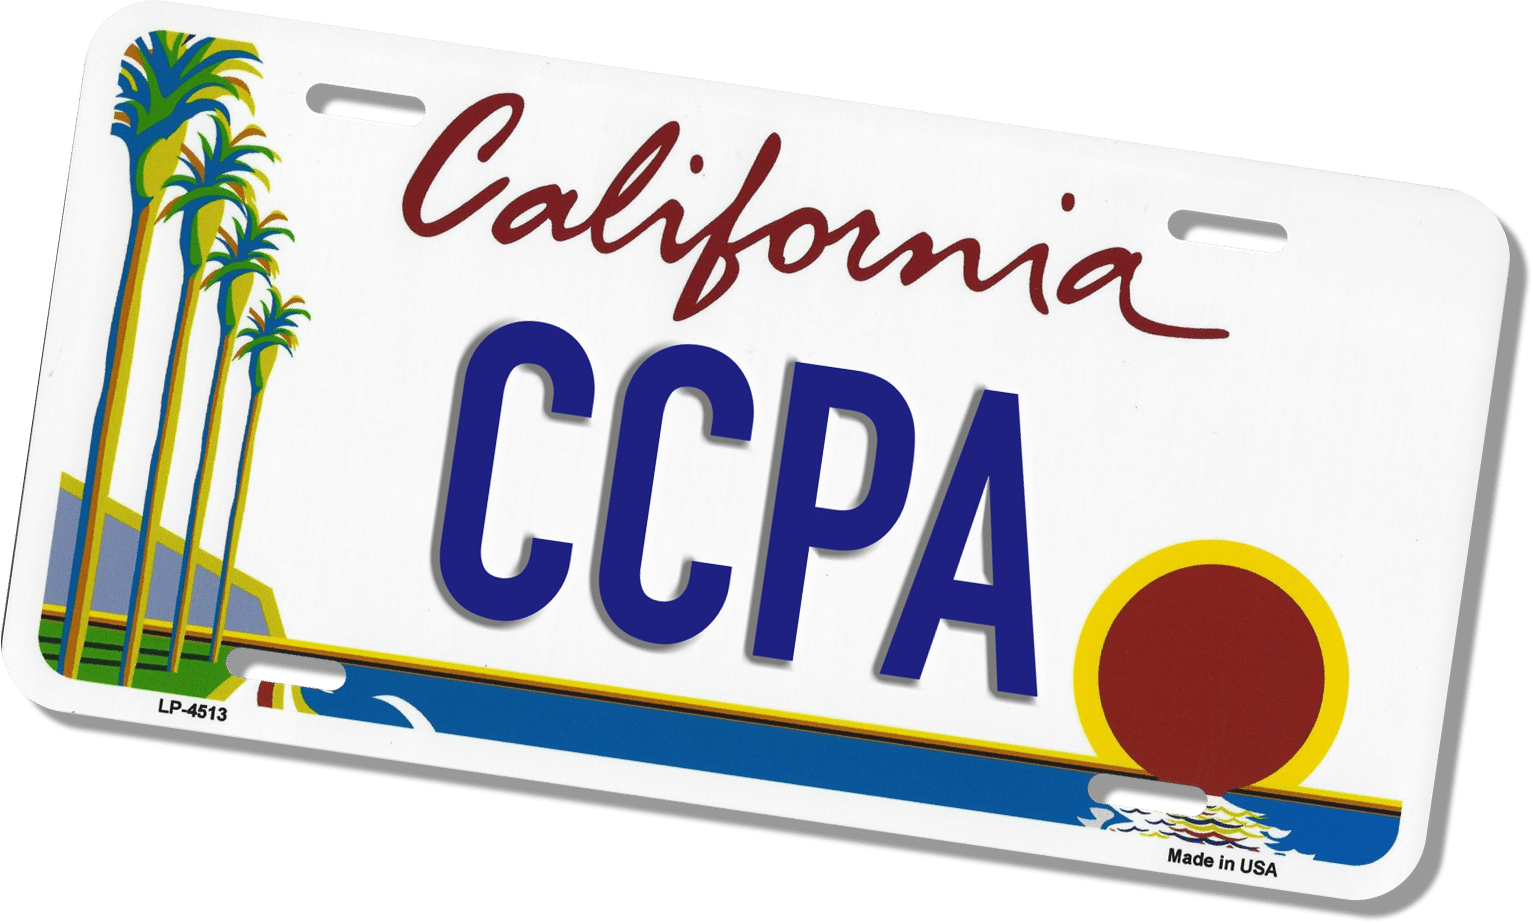 What You Need to Know about CCPA